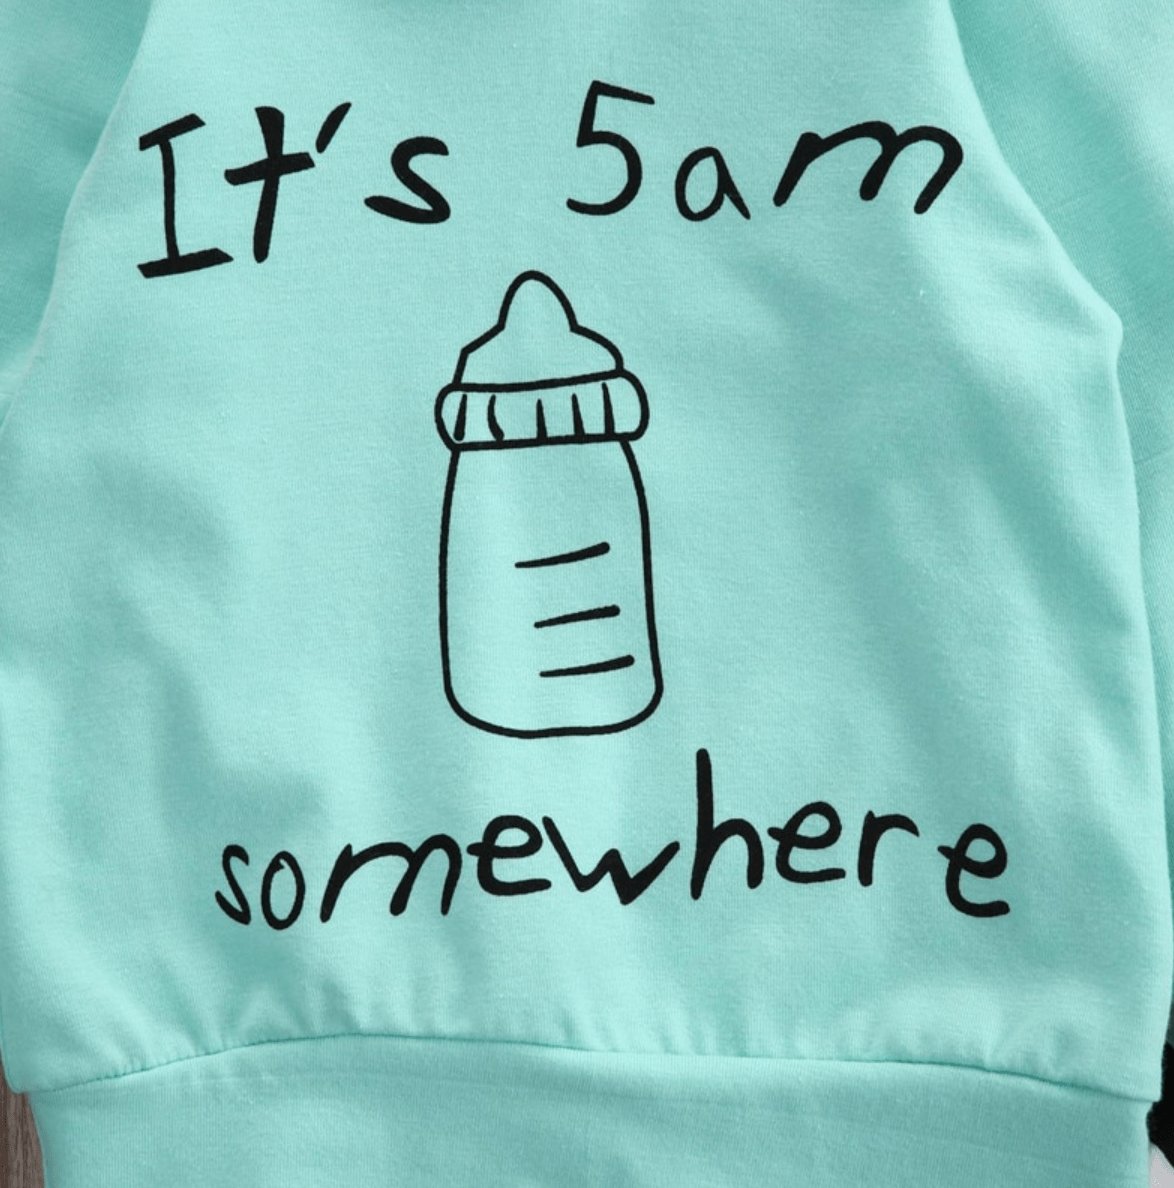 “IT’S 5 AM SOMEWHERE” 2-PIECE BABY SWEATSHIRT AND PANTS